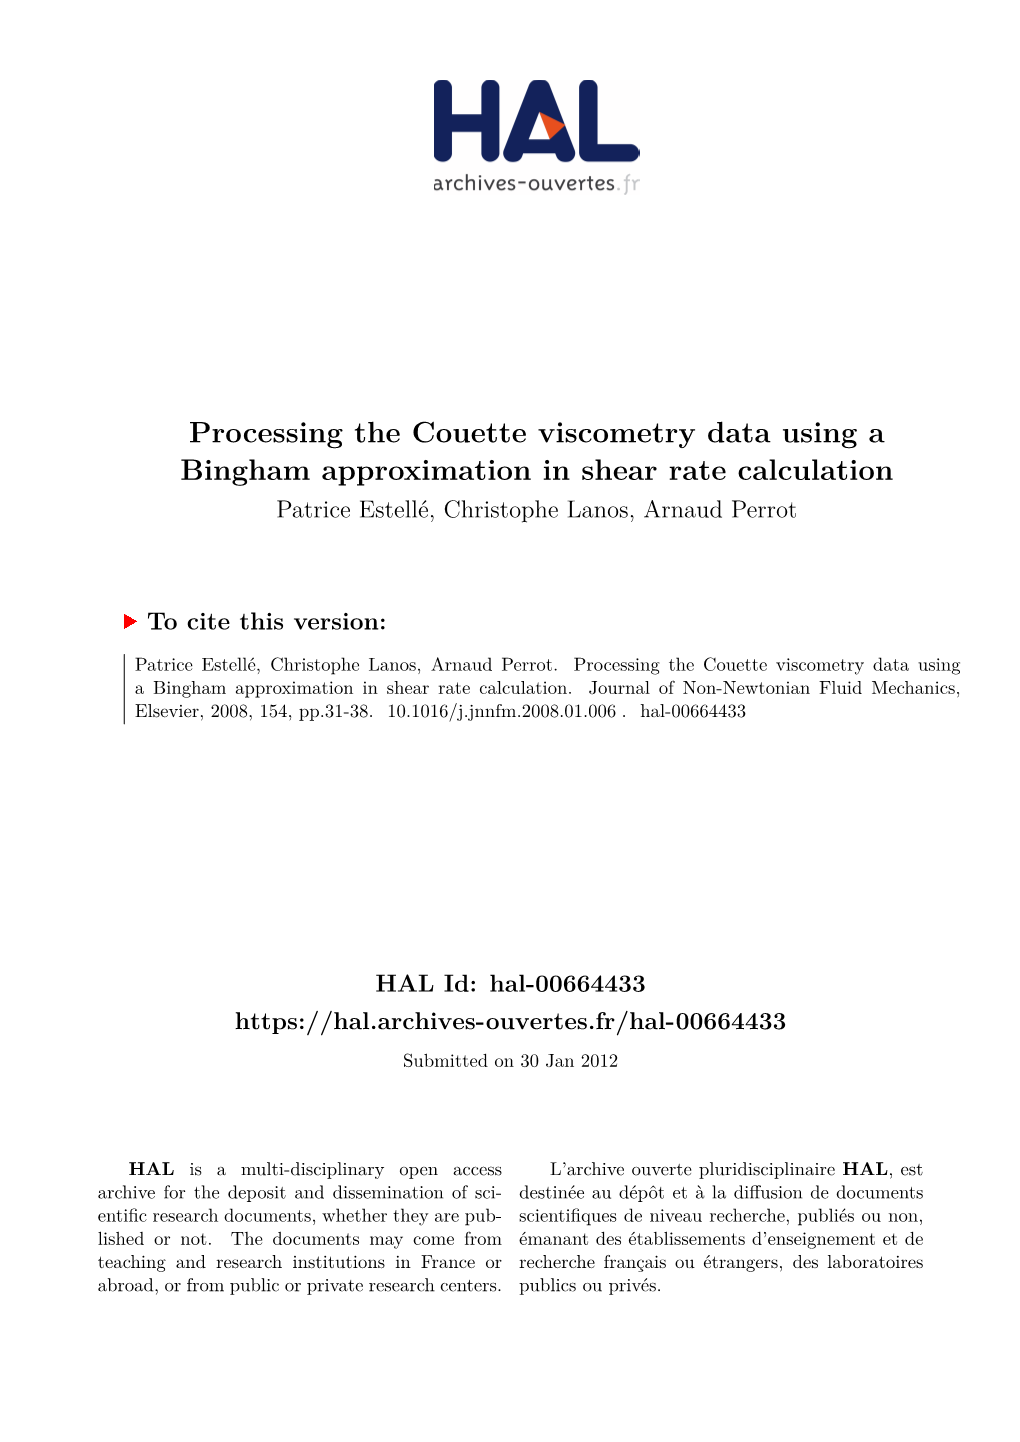 Processing the Couette Viscometry Data Using a Bingham Approximation in Shear Rate Calculation Patrice Estellé, Christophe Lanos, Arnaud Perrot